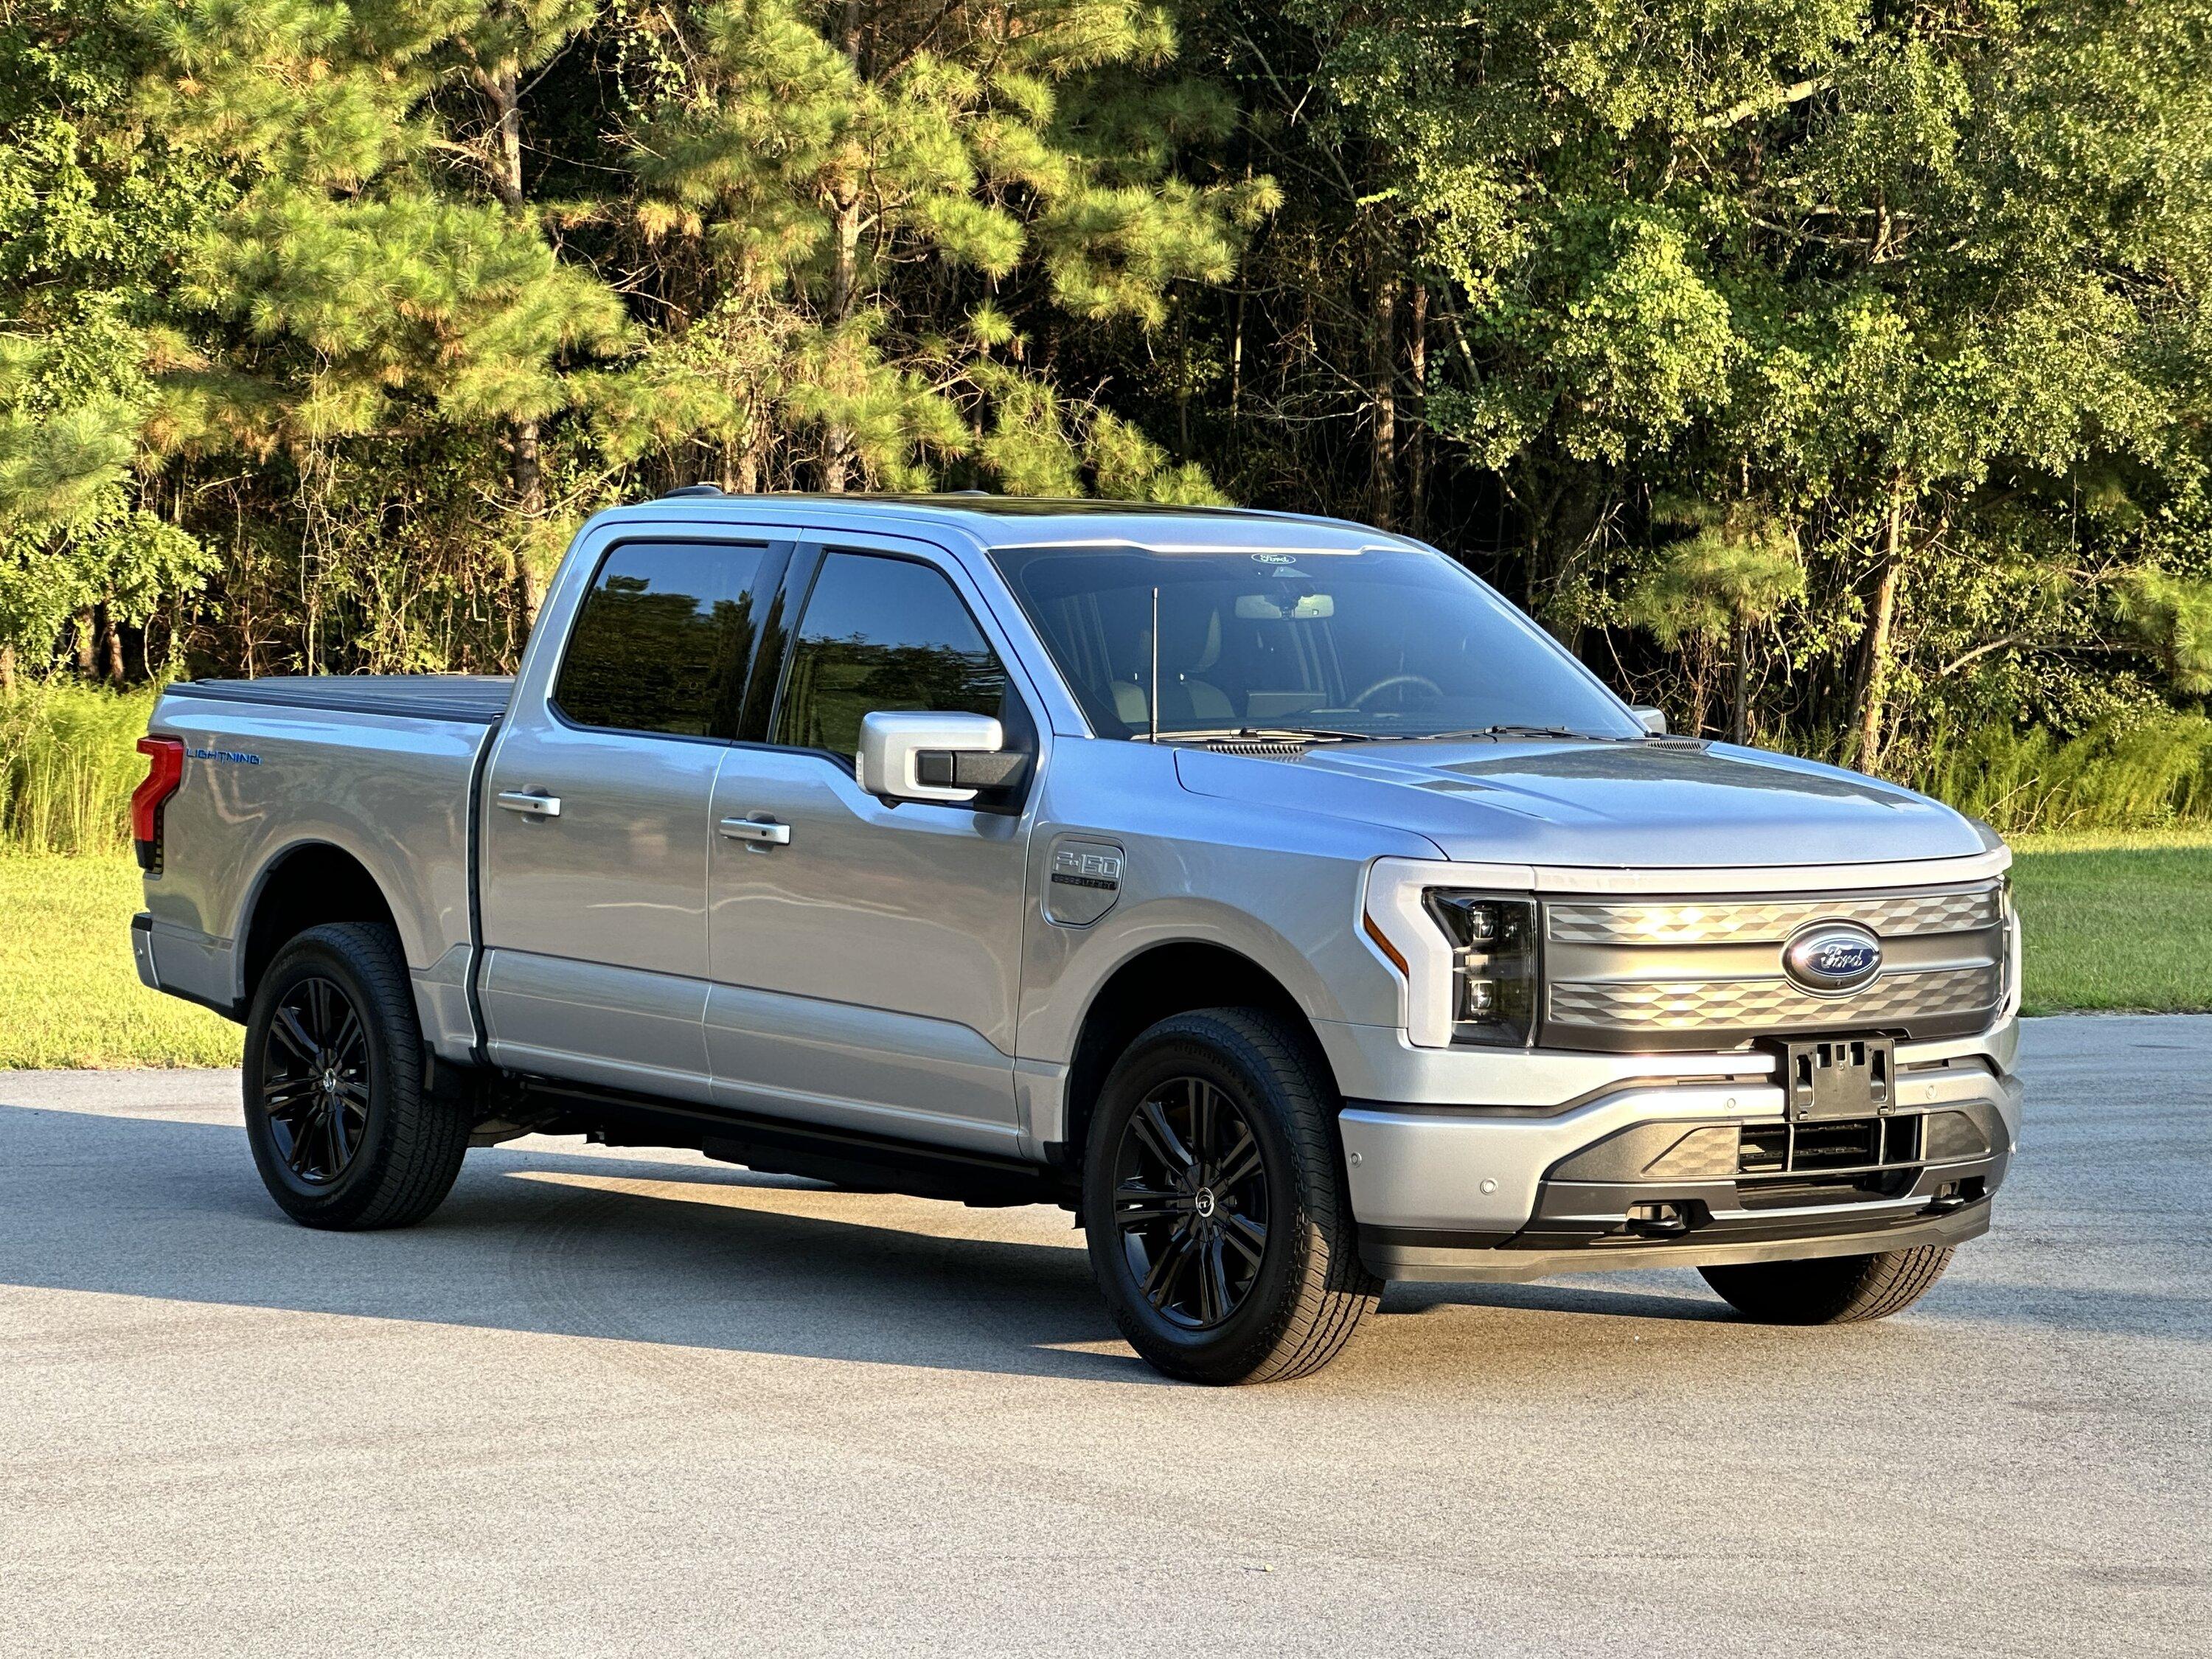 Ford F-150 Lightning Gloss black 20" wheels on my Lightning Lariat with stock AT tires, tints, AMP Power Steps DF5C811B-601B-47A7-9E9B-A23773F584AB